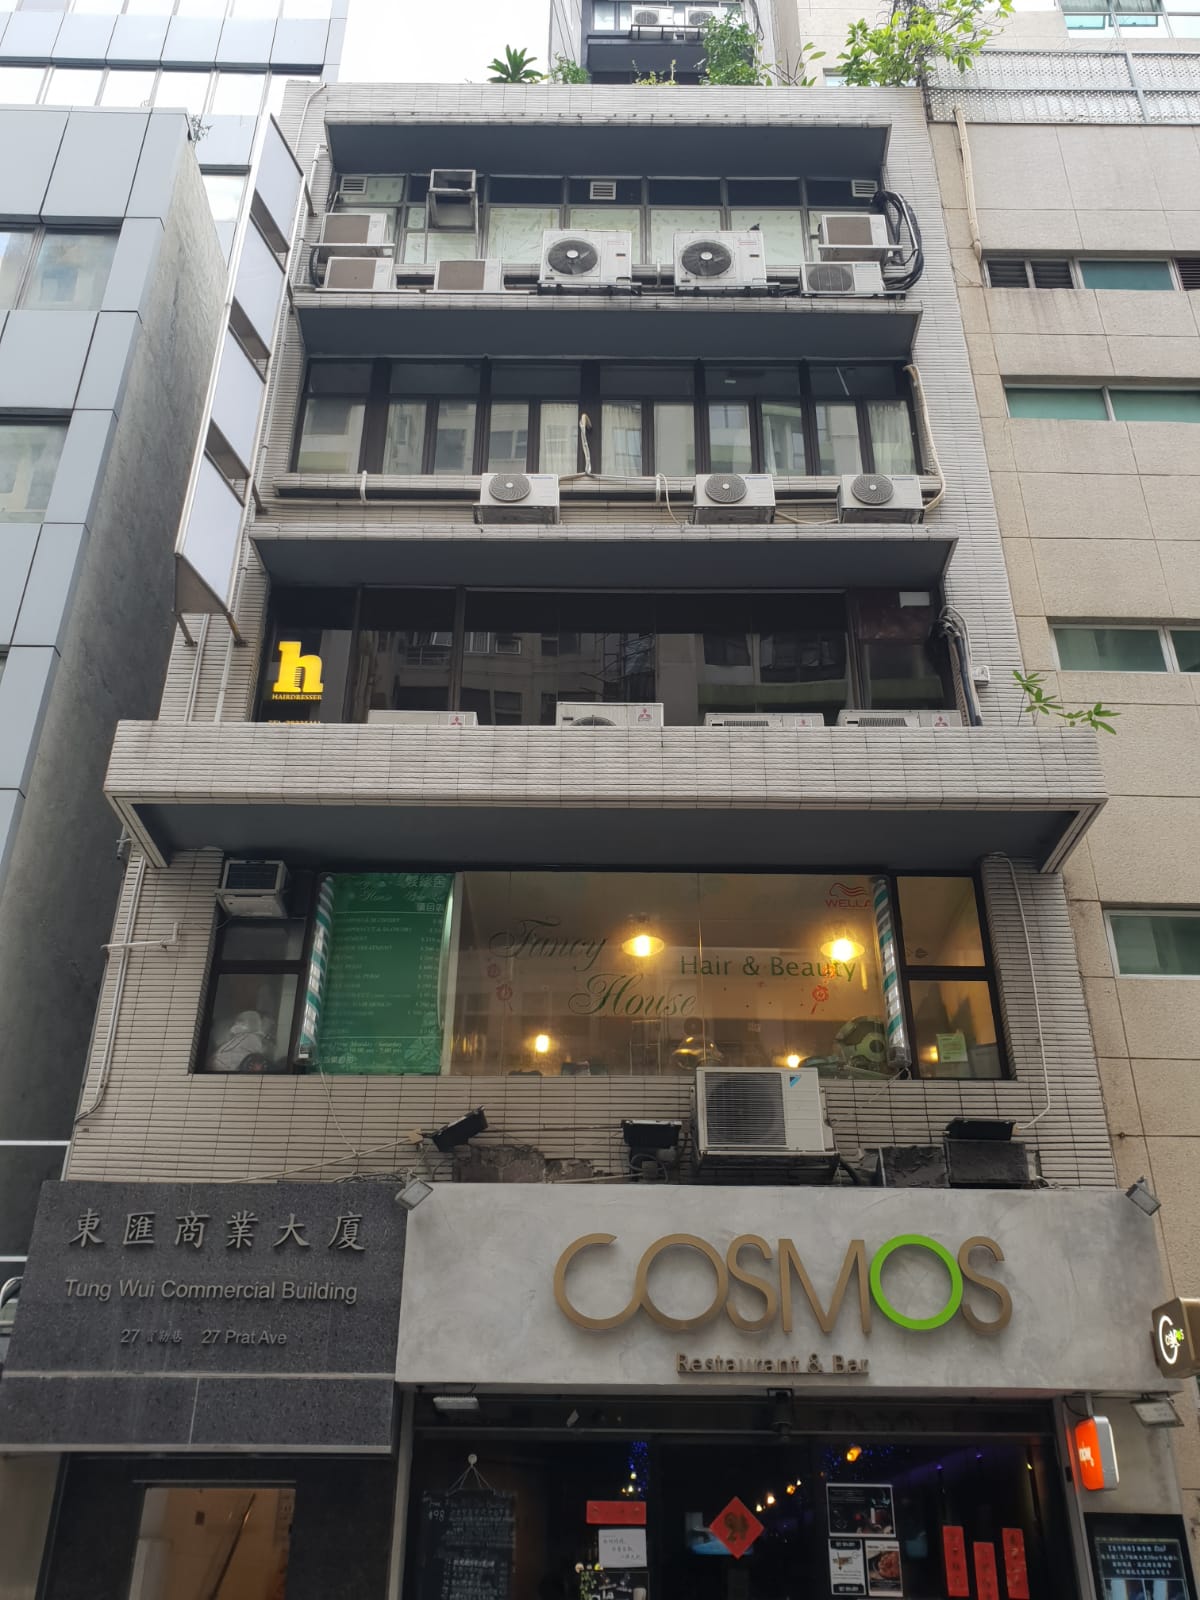 Tung Wui Commercial Building, Tsim Sha Tsui | Business Centre, Serviced  Office & Coworking Space Rental